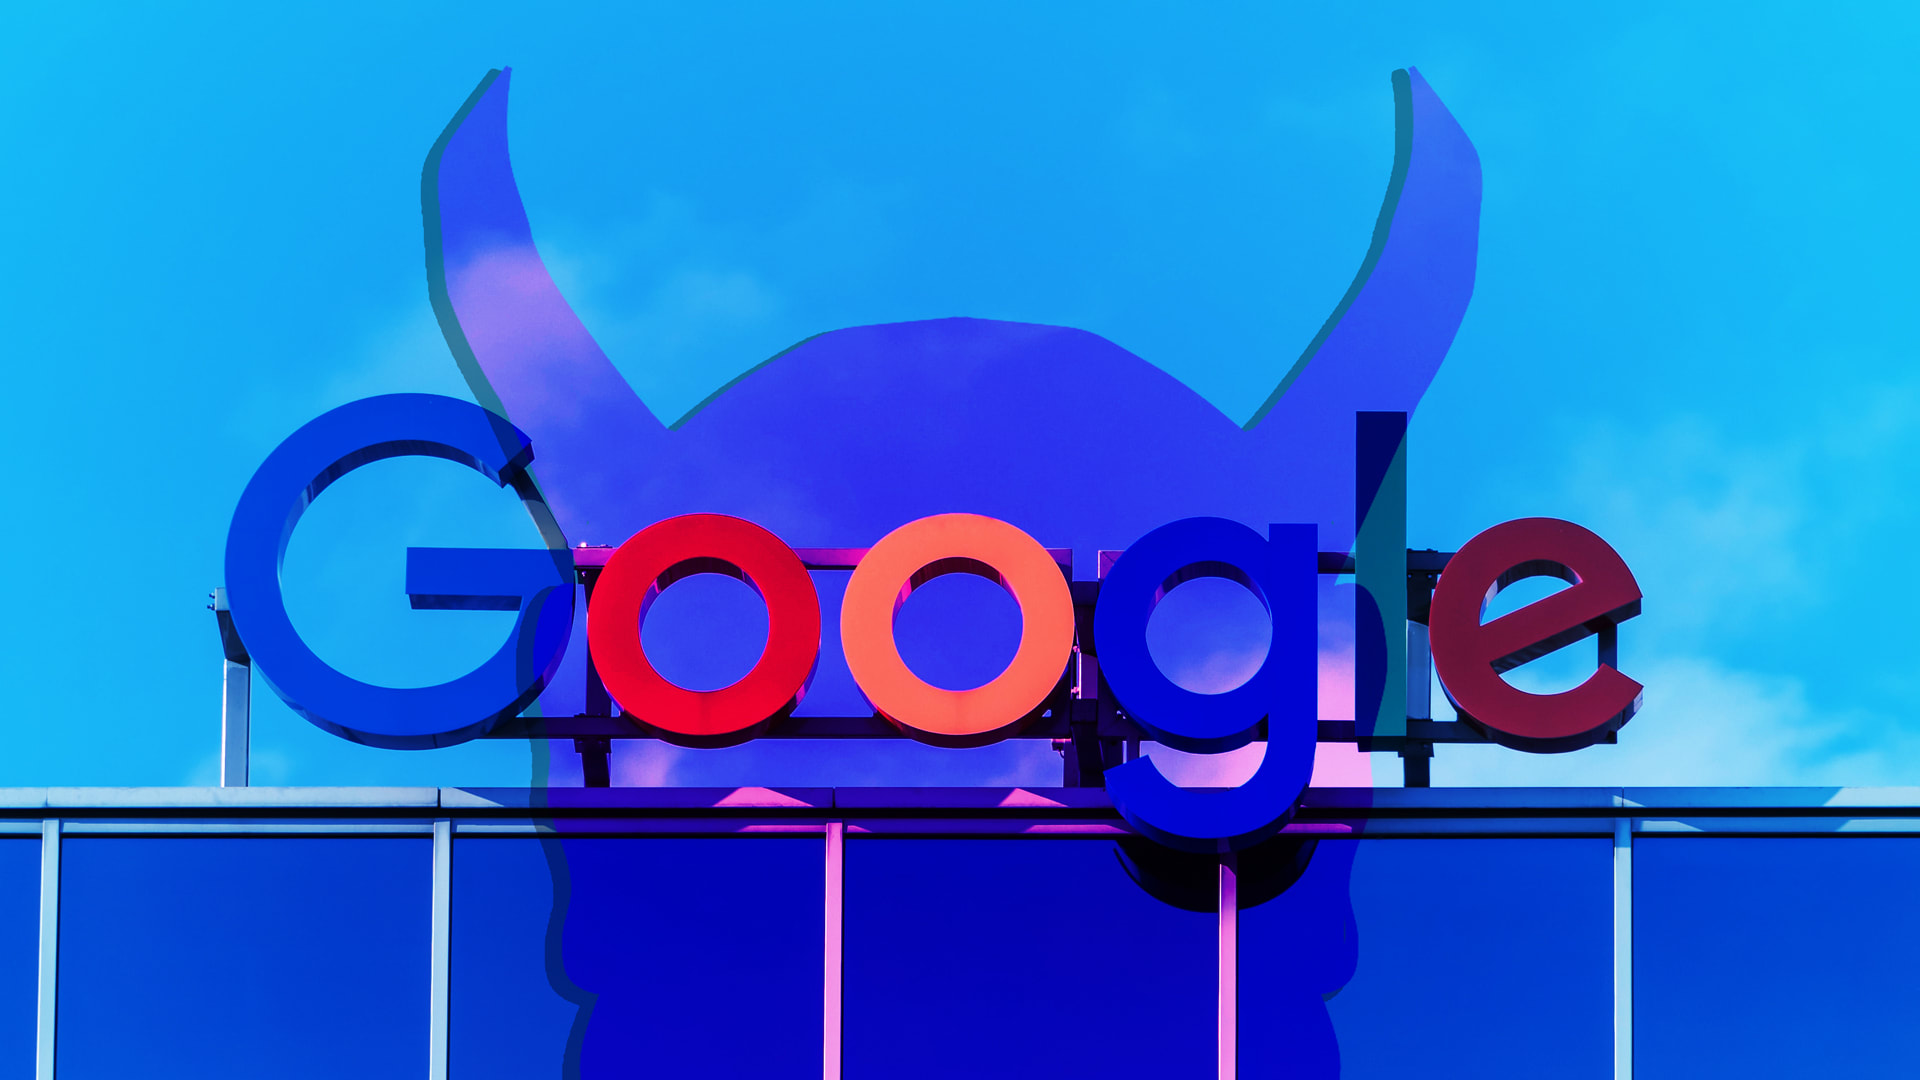 Fired employees invoke Google’s ‘Don’t be evil’ motto in their workplace complaint